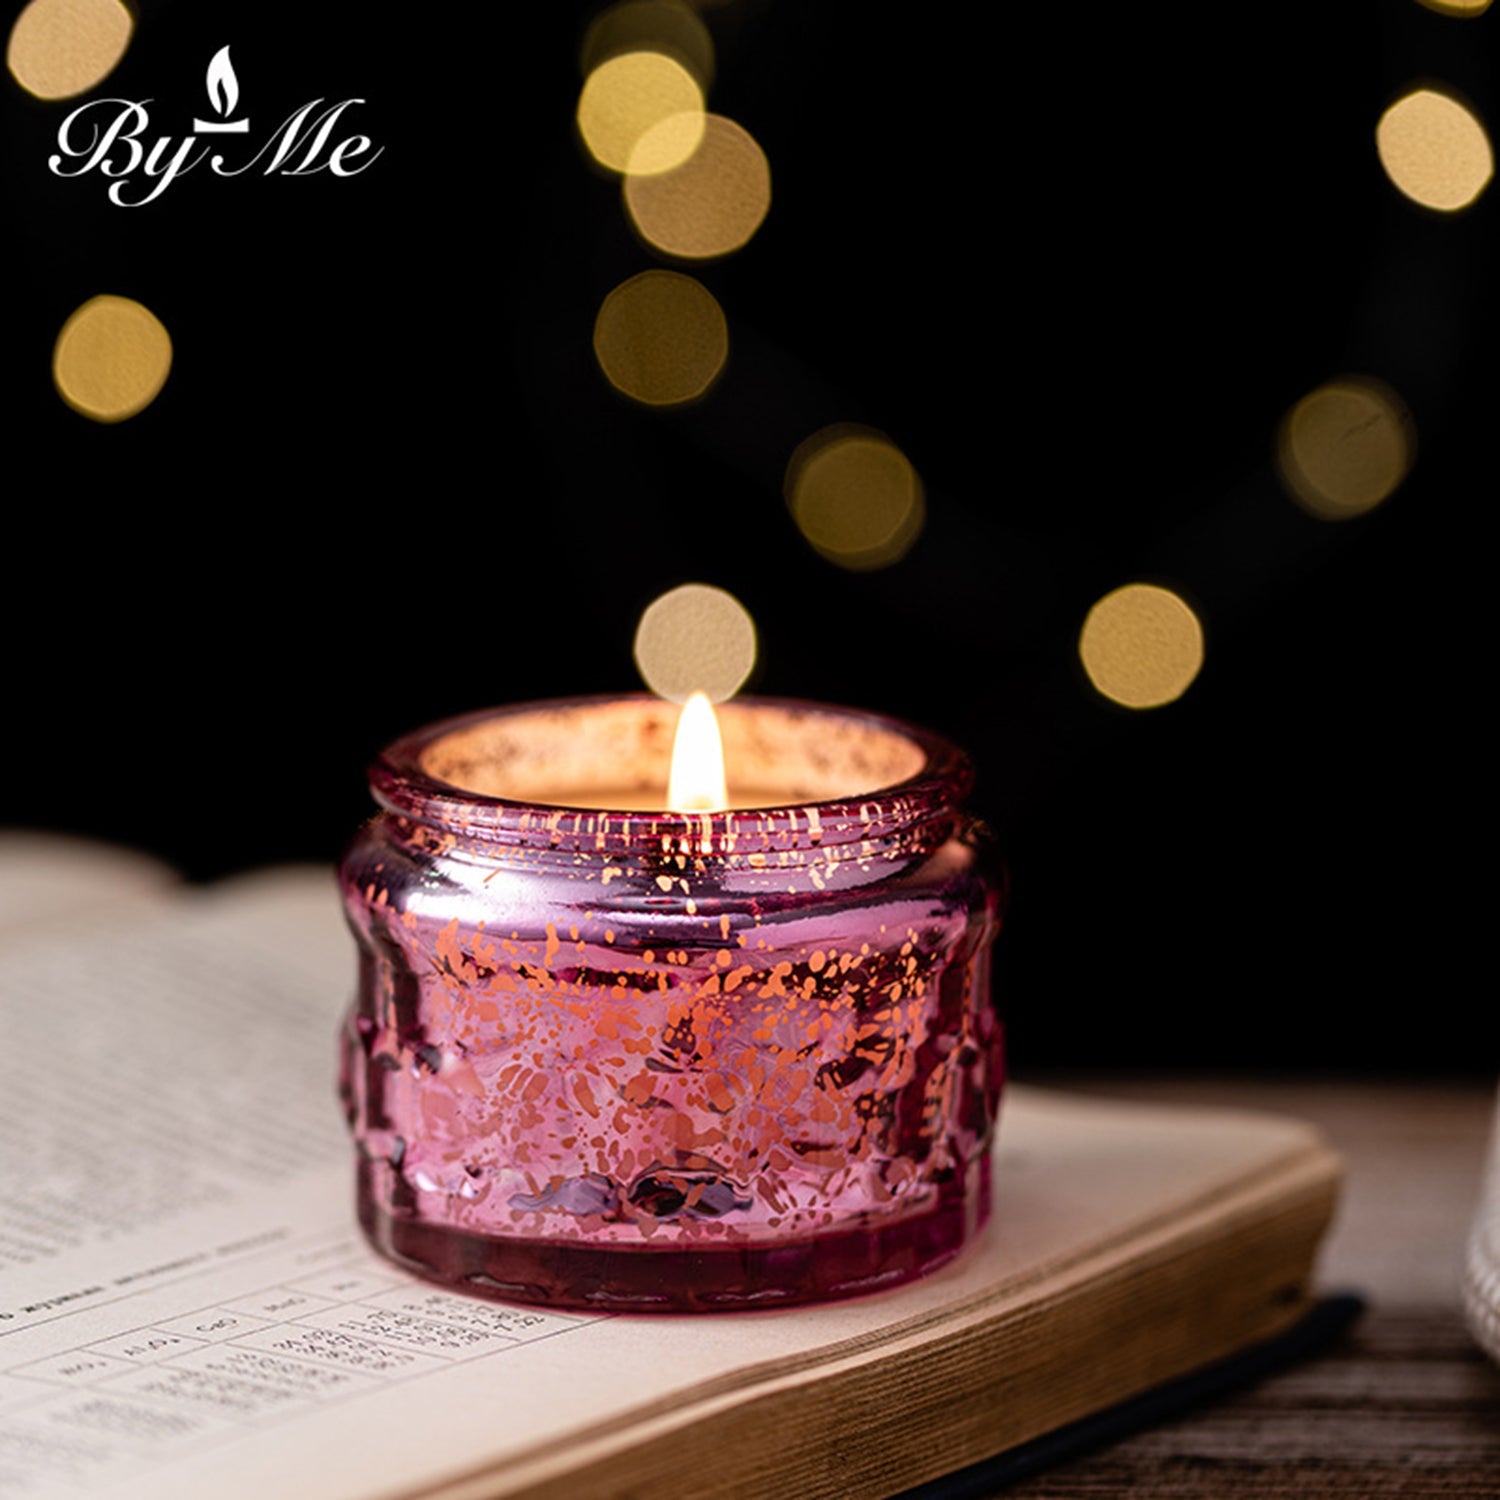 BYME Scented Candle Soy Wax Creative Romantic Starry Sky Cup Handmade Aromatherapy Candle Gift Ideas Small Size Scented Candle BYME 